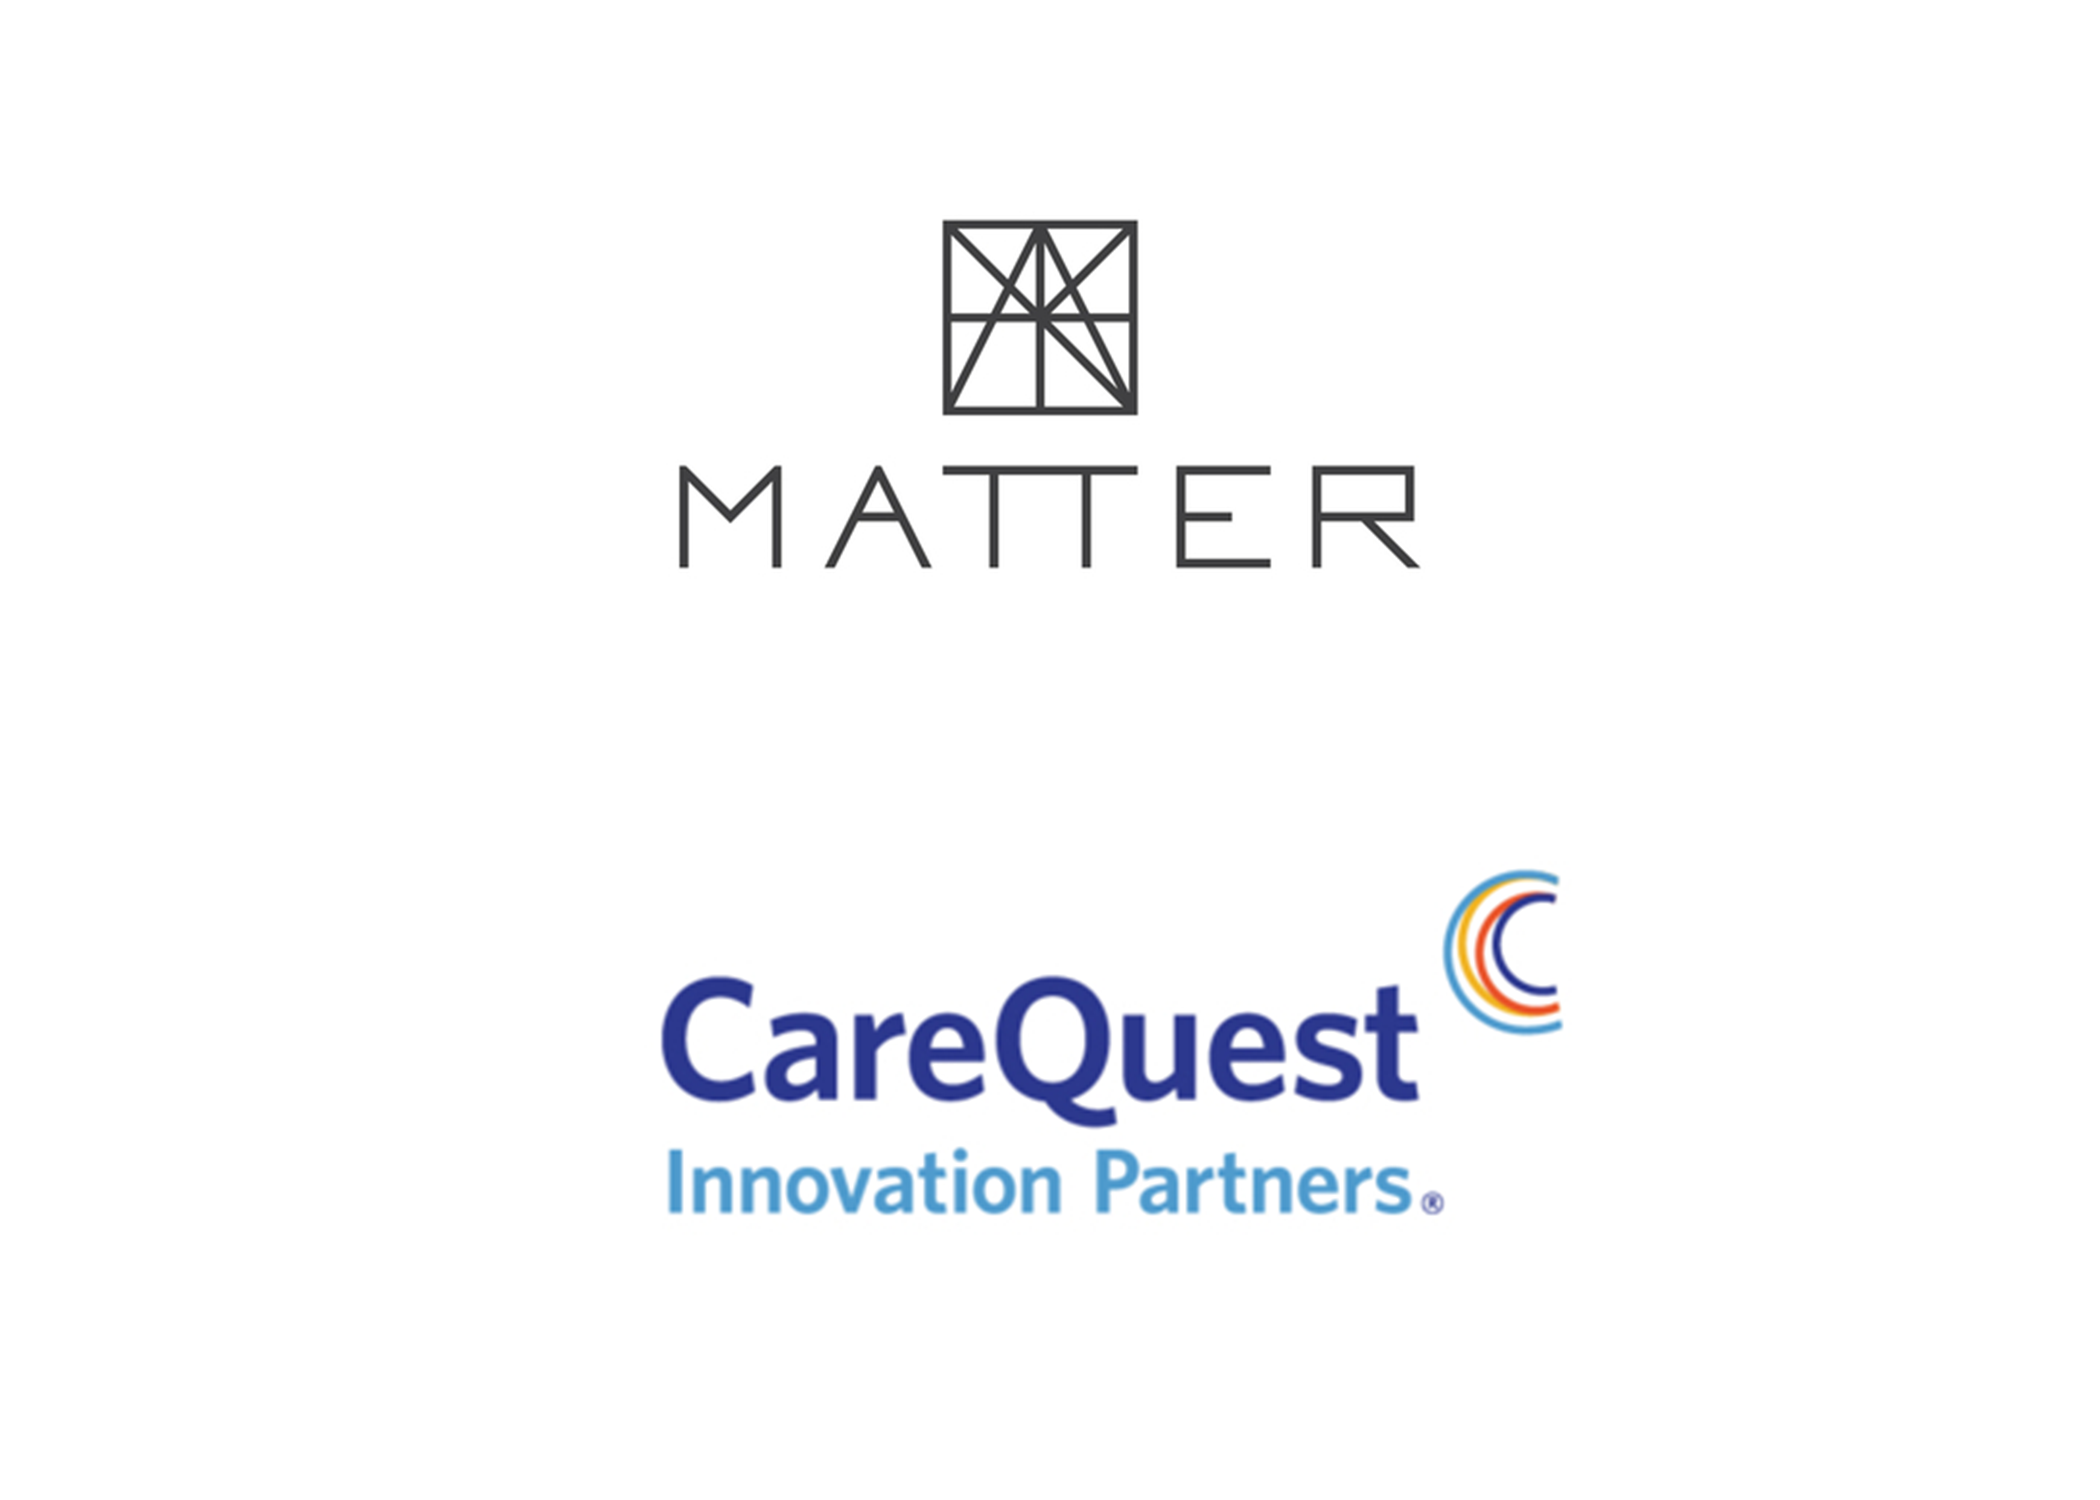 CareQuest Innovation Partners and MATTER Announce Startups for 2024 SMILE Health Program. Image credit: © CareQuest Innovation Partners © MATTER